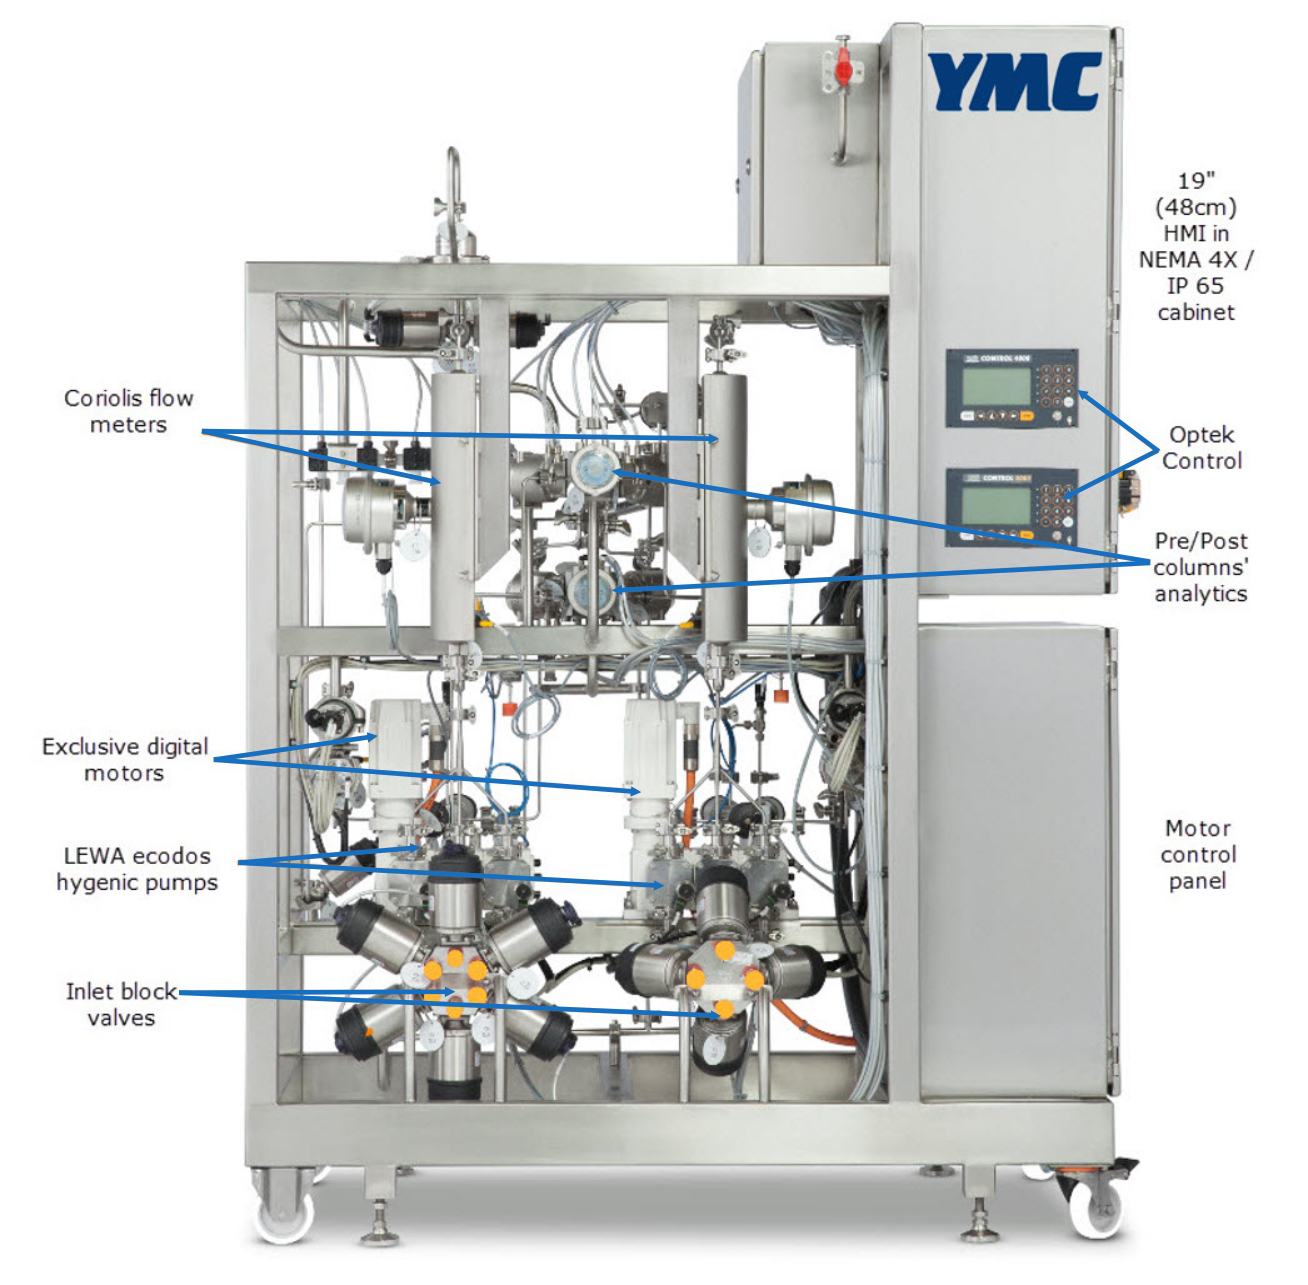 YMC EcoPrime Twin - the GMP scale up equipment for the Contichrom CUBE